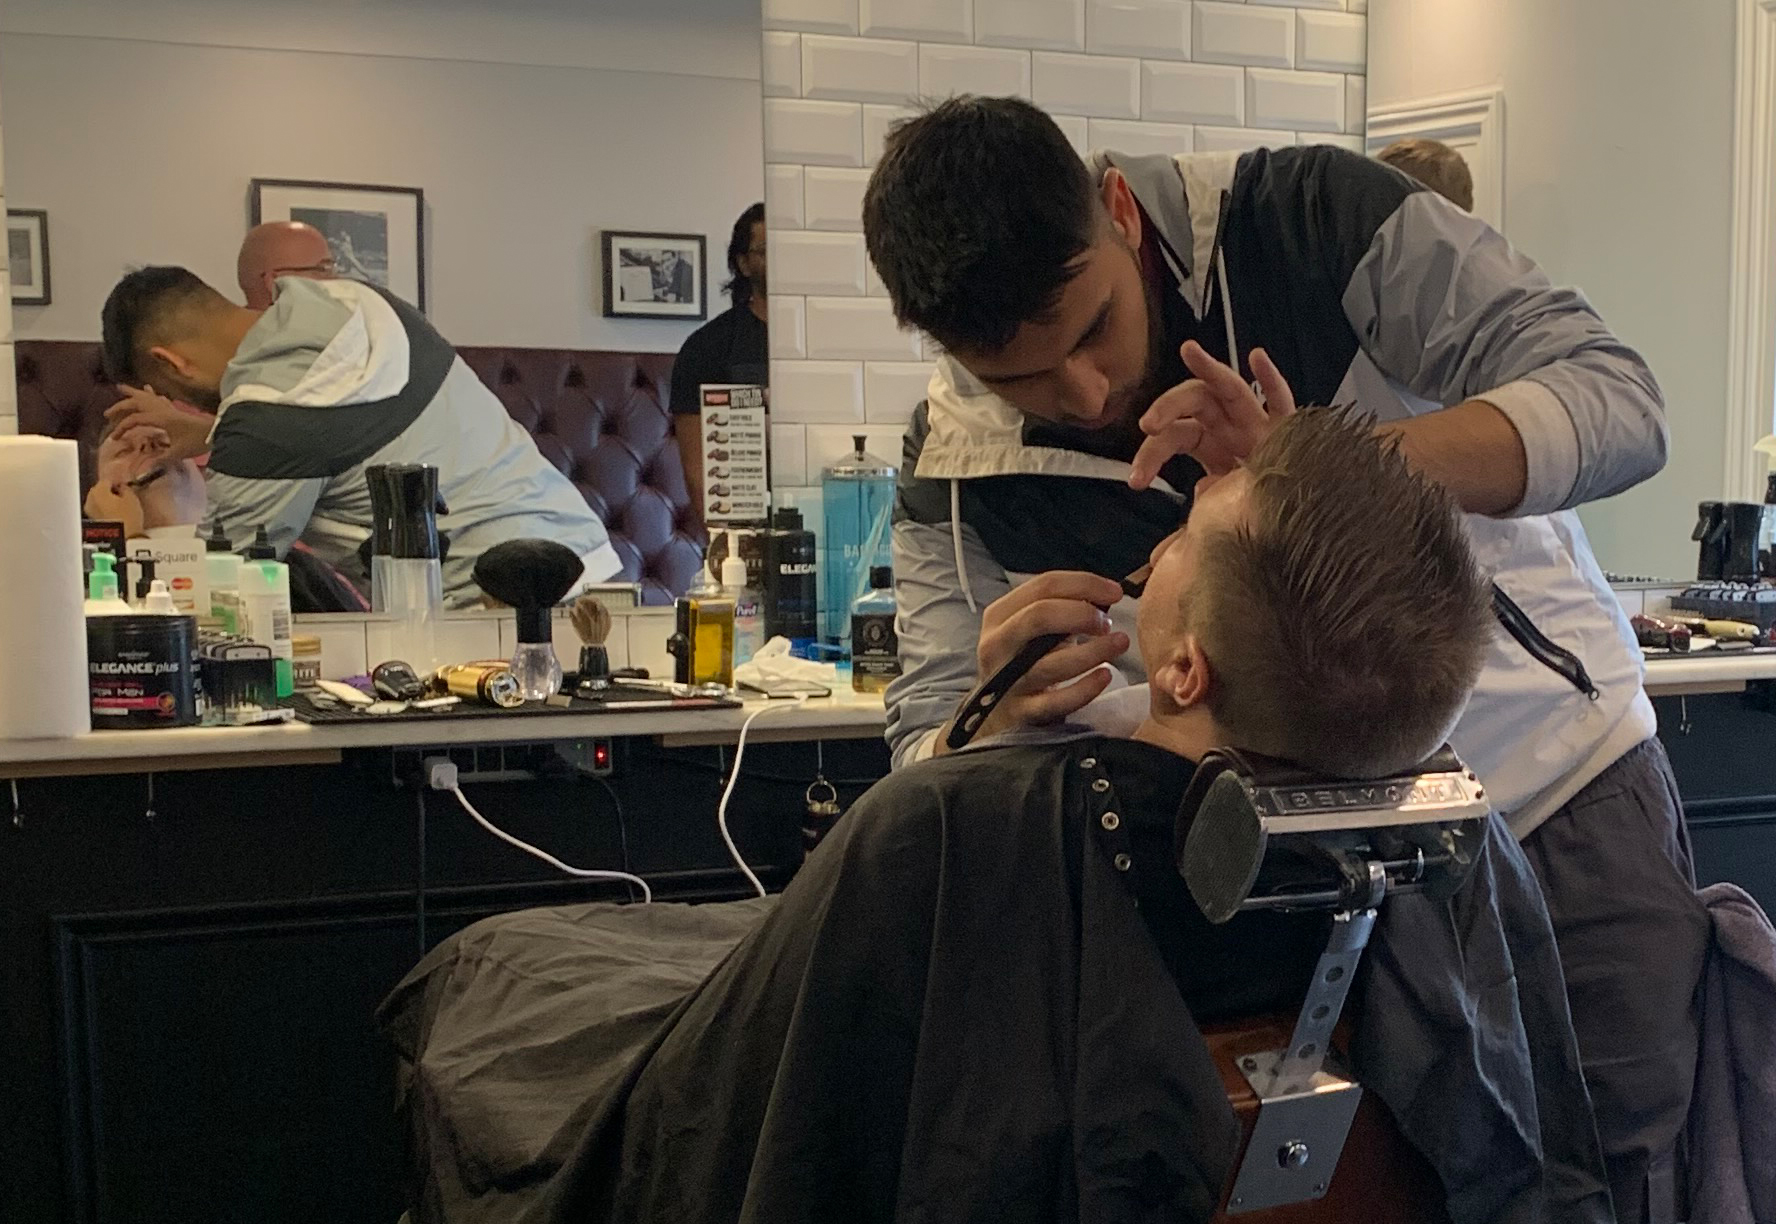 Man in barber chair